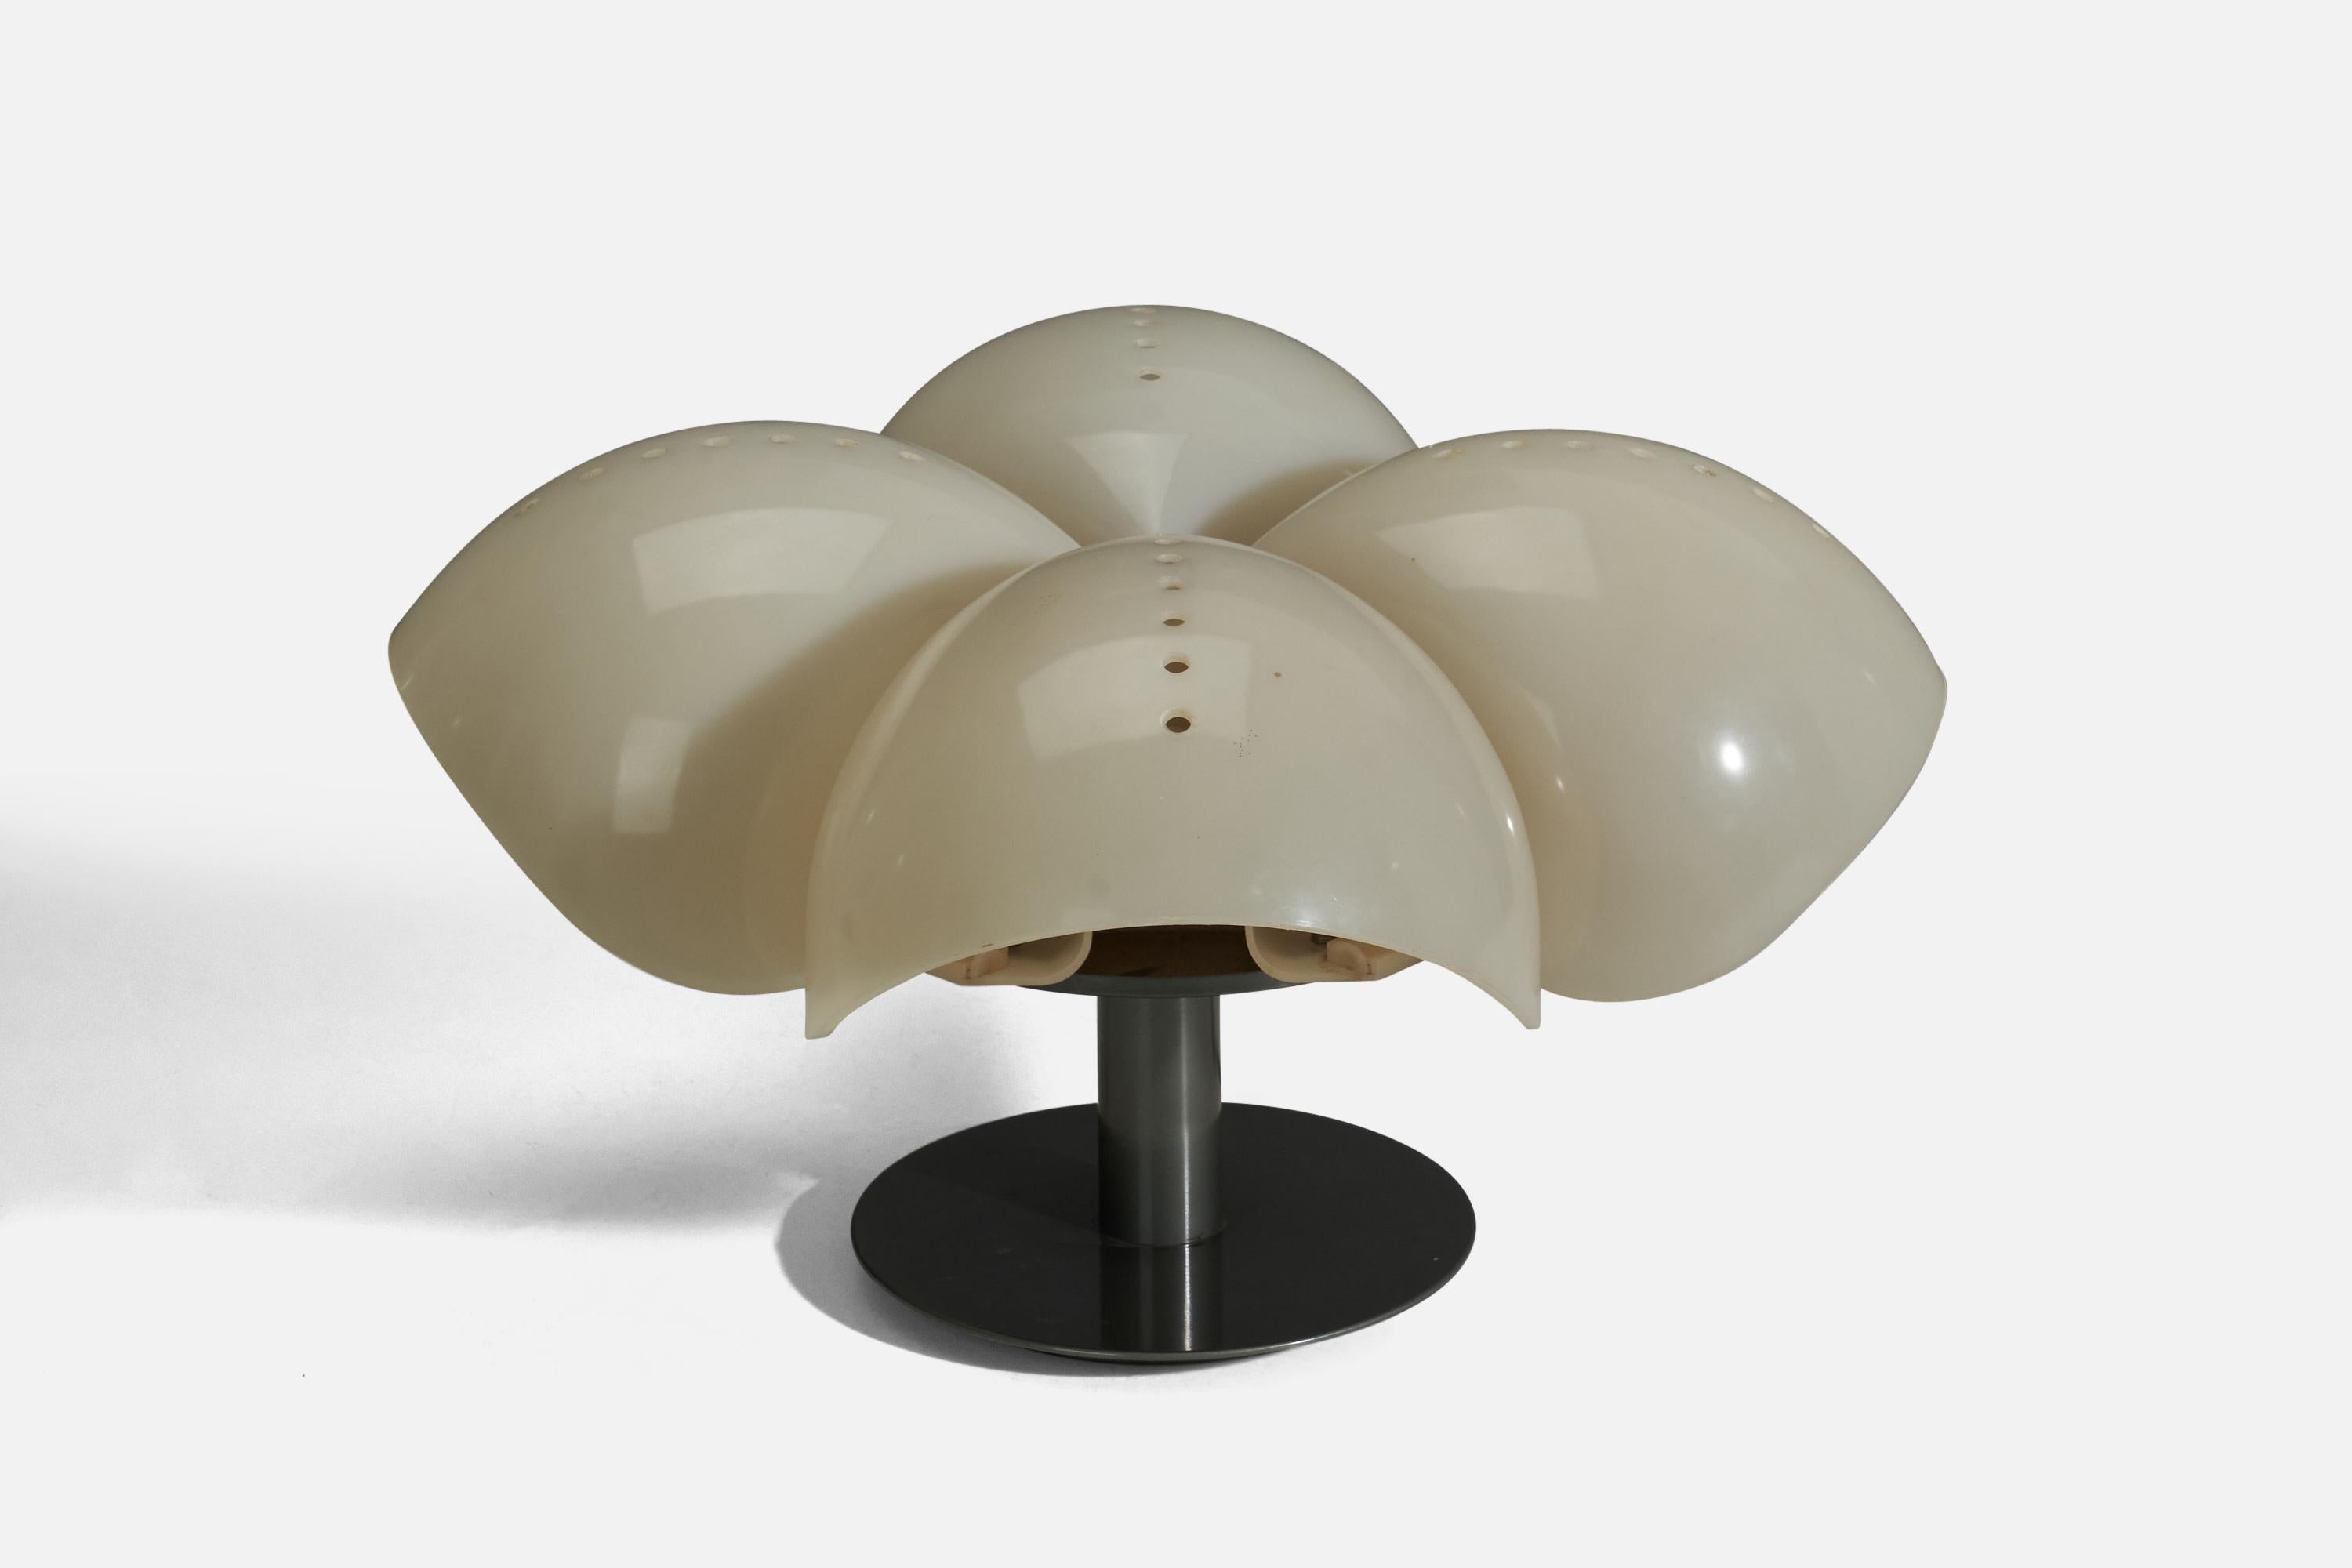 A metal and polycarbonate table lamp, model Pavone, designed by Sergio Mazza and Giuliana Gramigna and produced by Quadrifoglio Design, Italy, 1974. 

Socket takes standard E-26 medium base bulb.

There is no maximum wattage stated on the